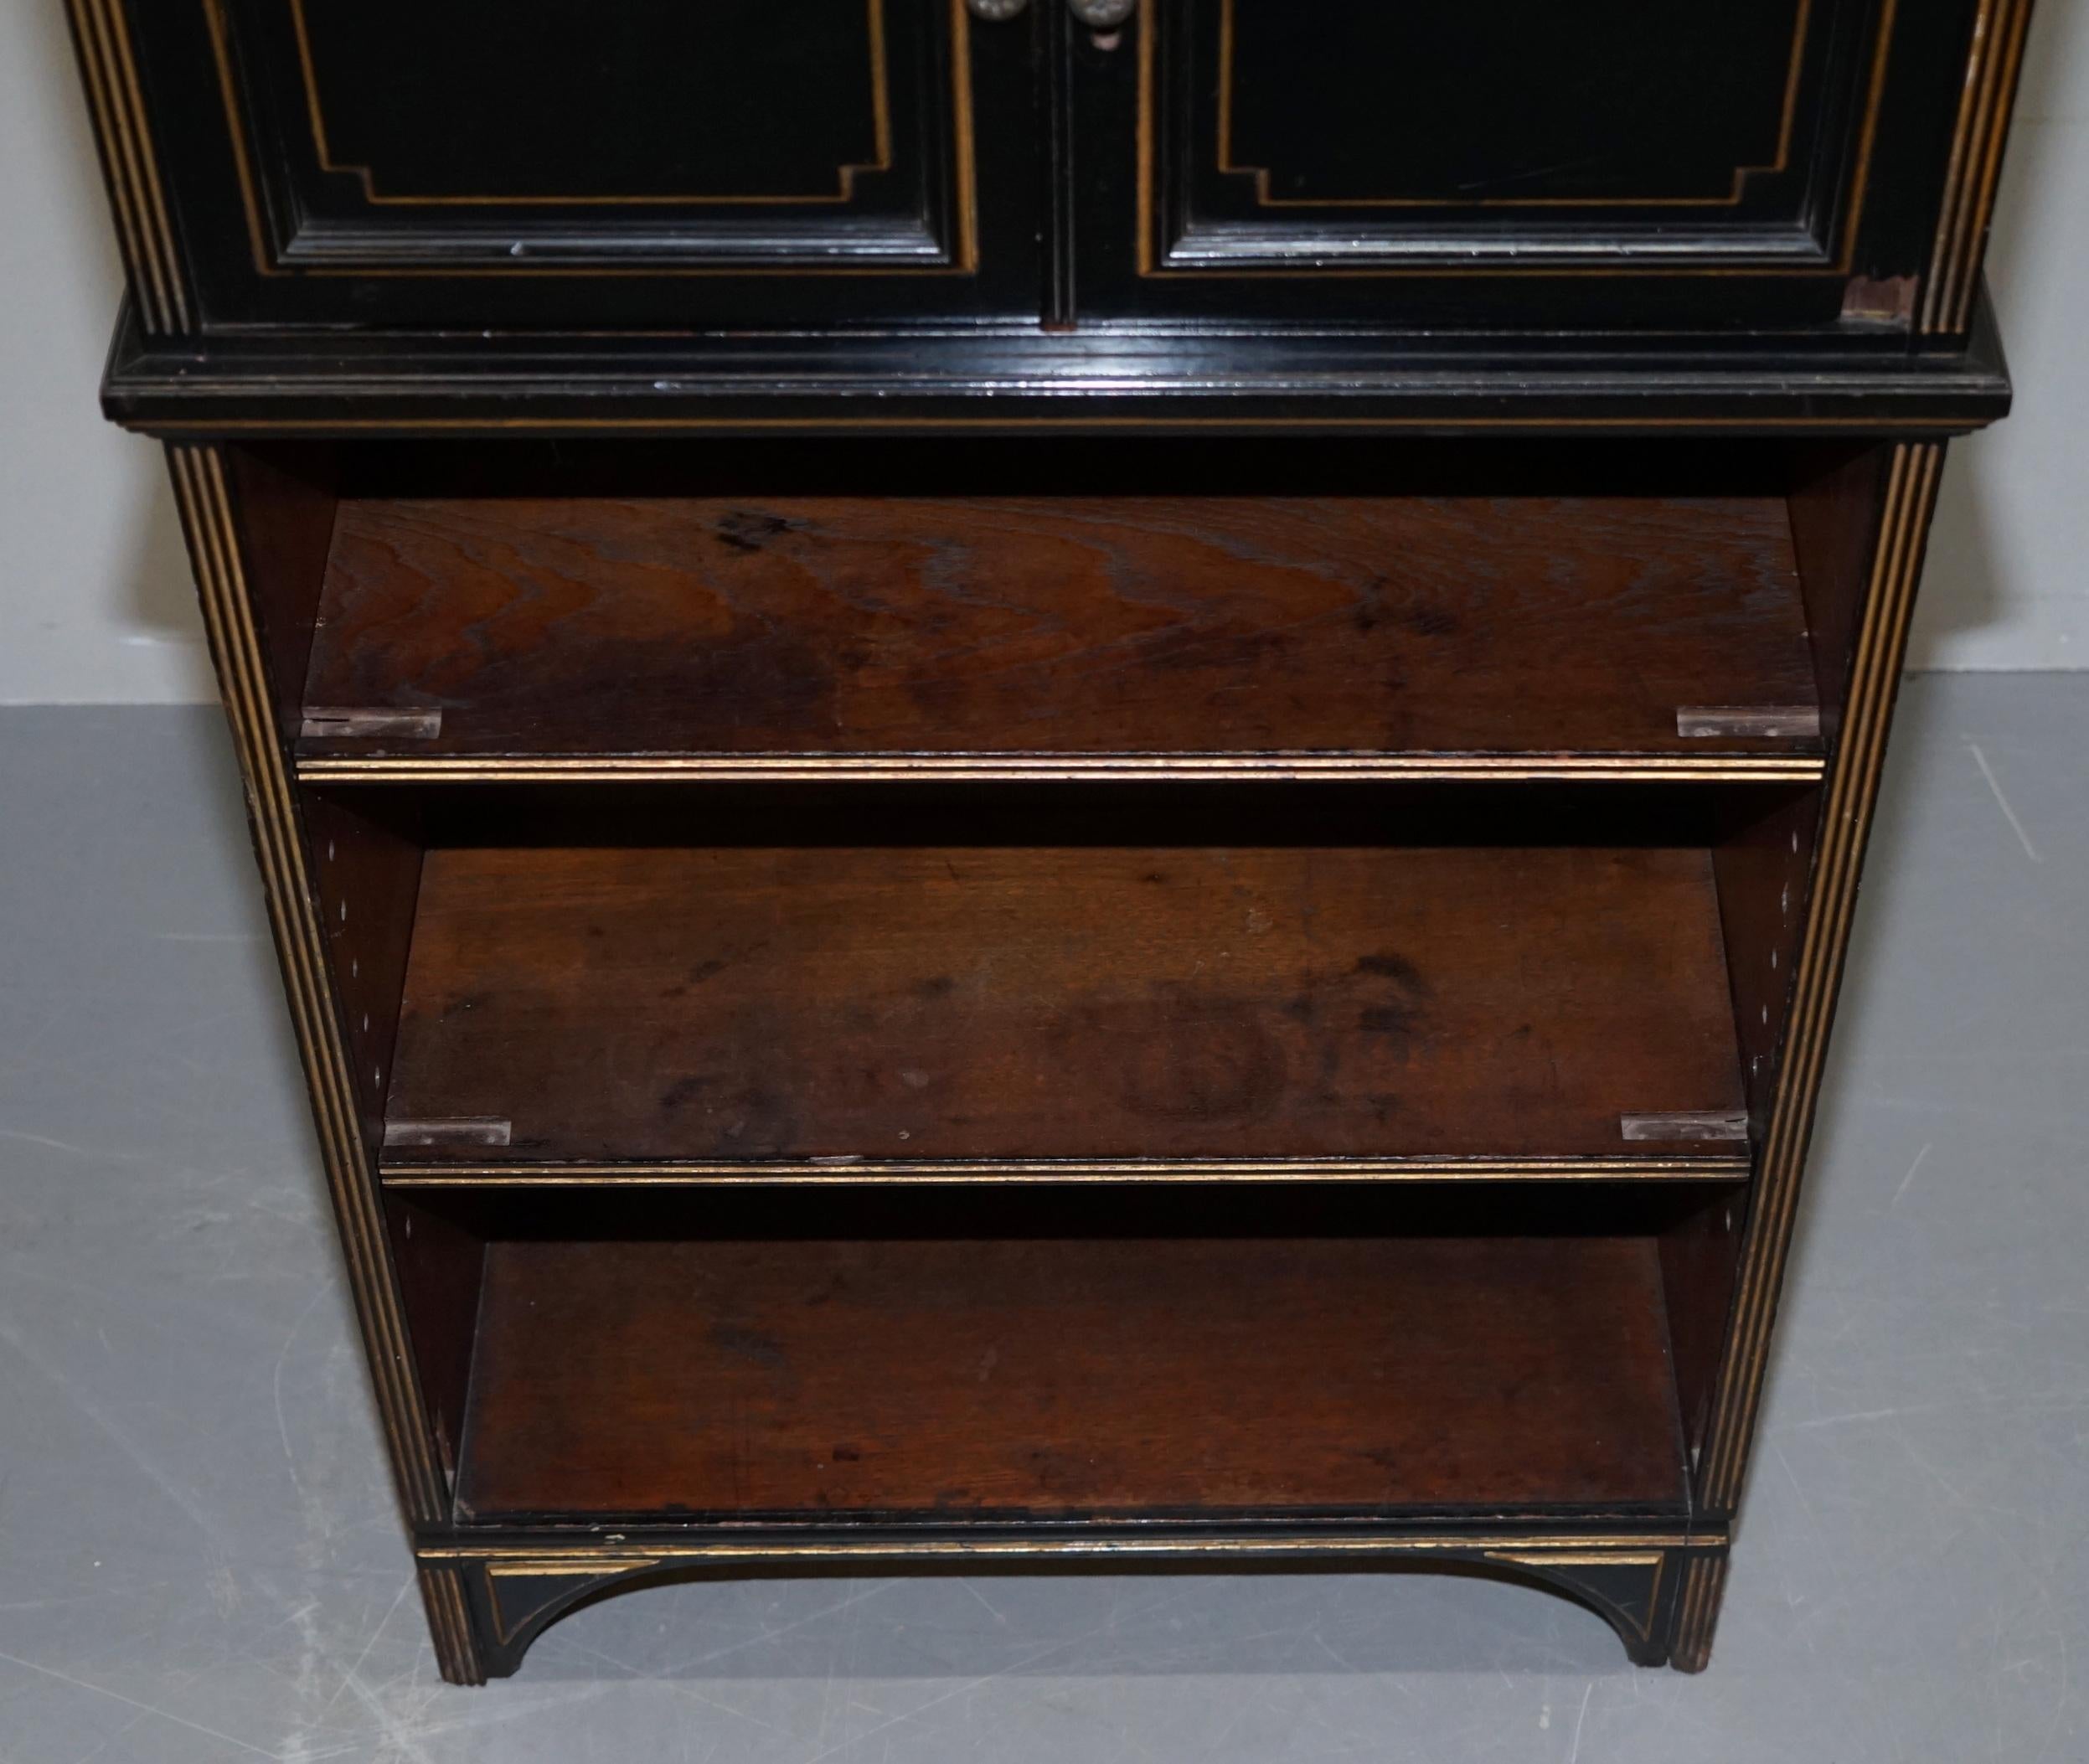 Original Stamped Holland & Sons's Aesthetic Movement Victorian Antique Bookcase 4